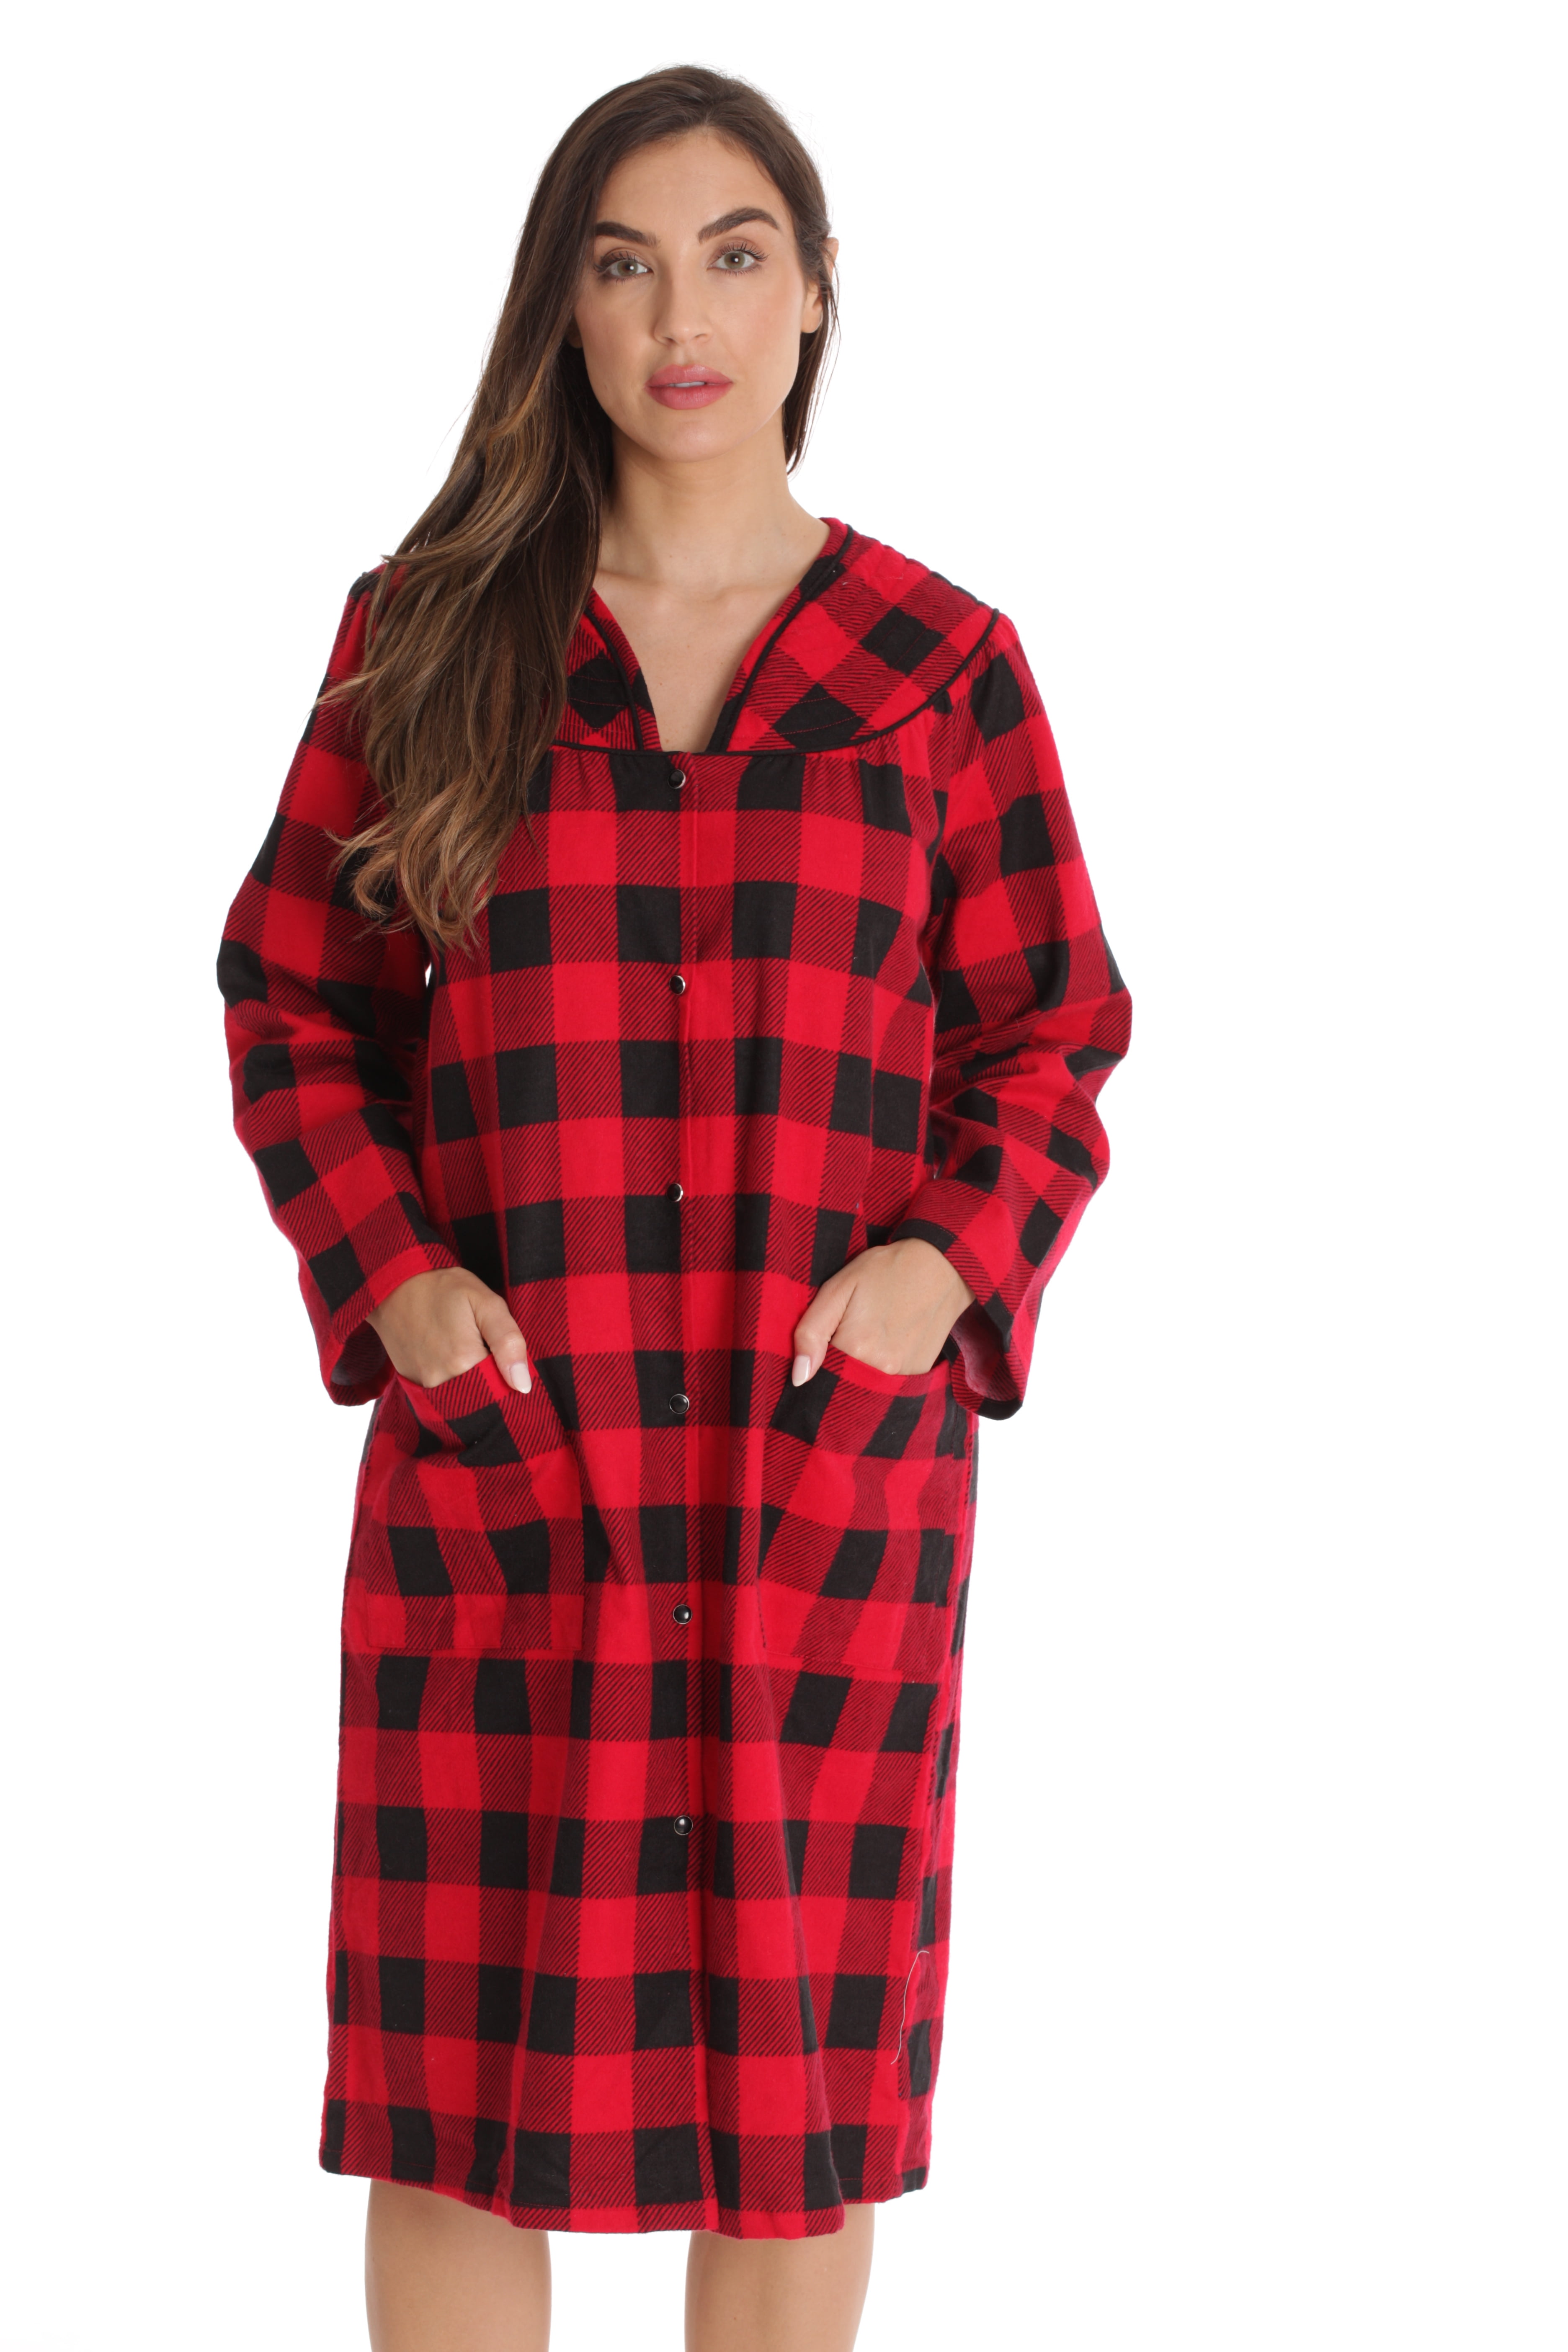 Dreamcrest Women’s Snap-Front House Coat Flannel Duster Robe with ...